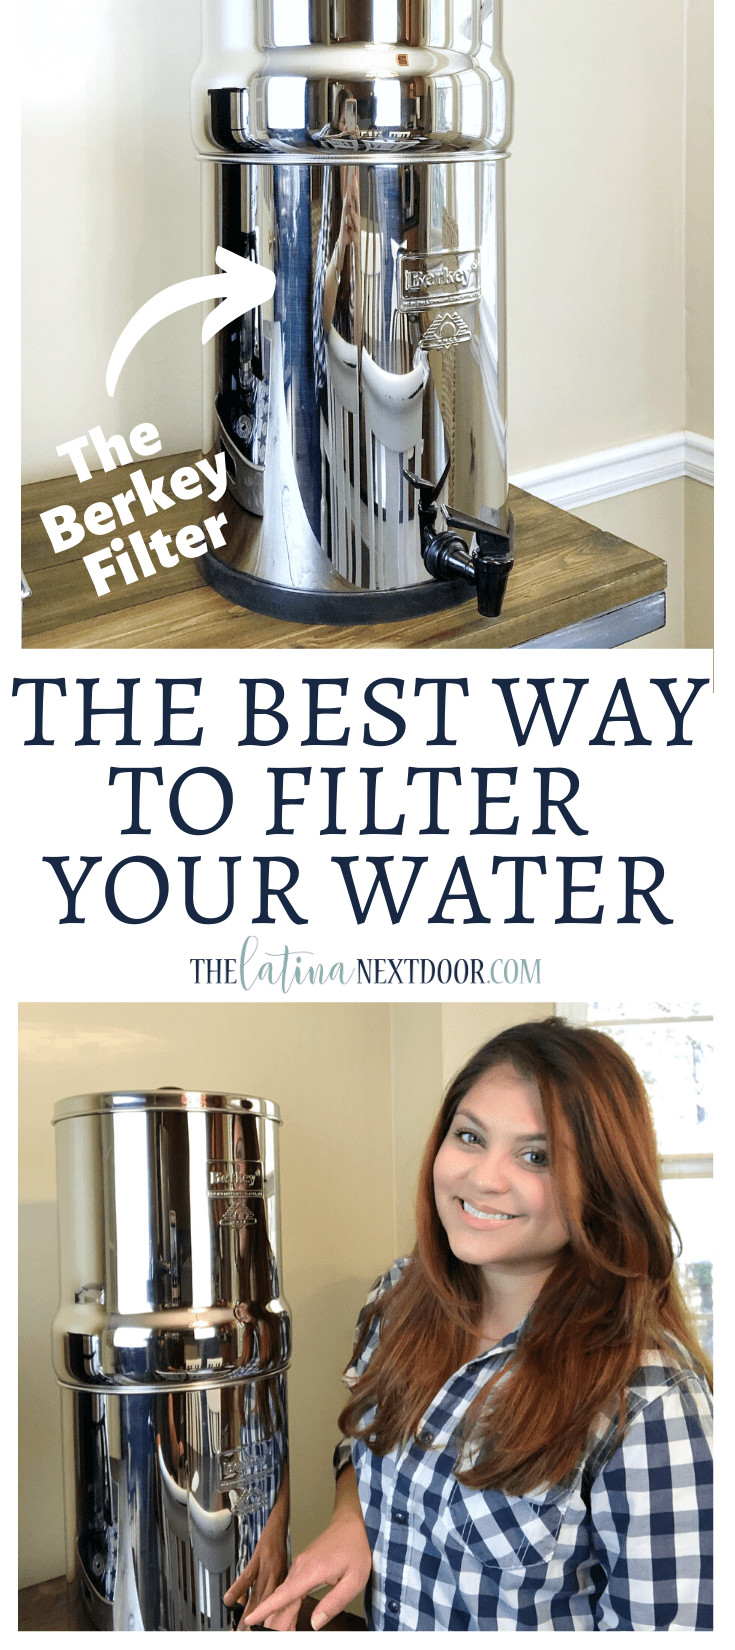 DIY Christmas Tree Watering System
 How We Filter Our Water The Berkey Filter